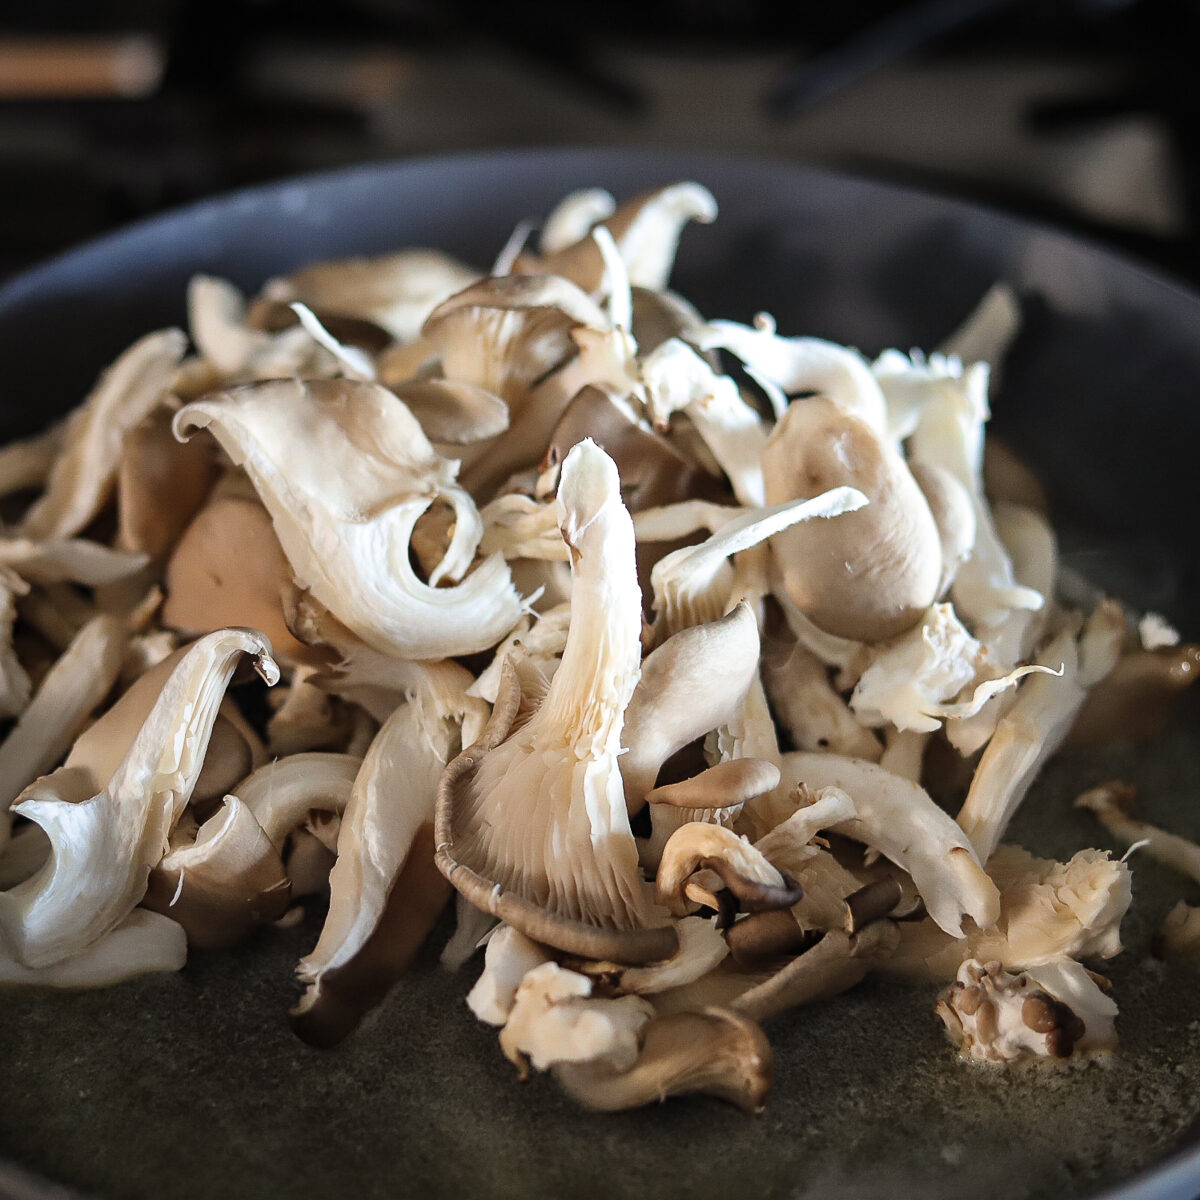 A pile of torn oyster mushrooms in the frying pan. They are light oyster grey and cream colors.